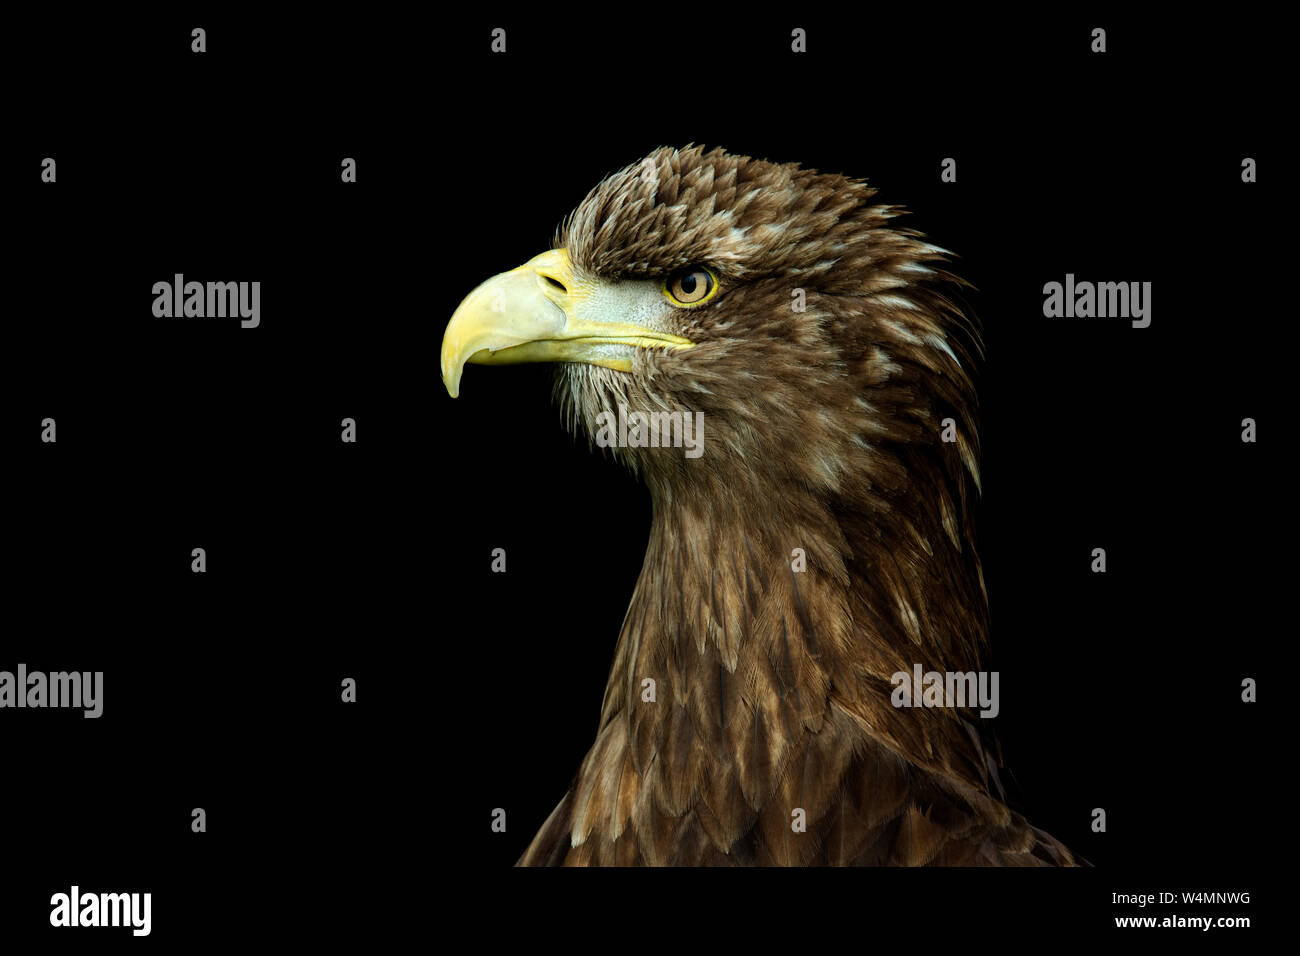 Eagle Side View Headshot Portrait With Black Background Stock Photo